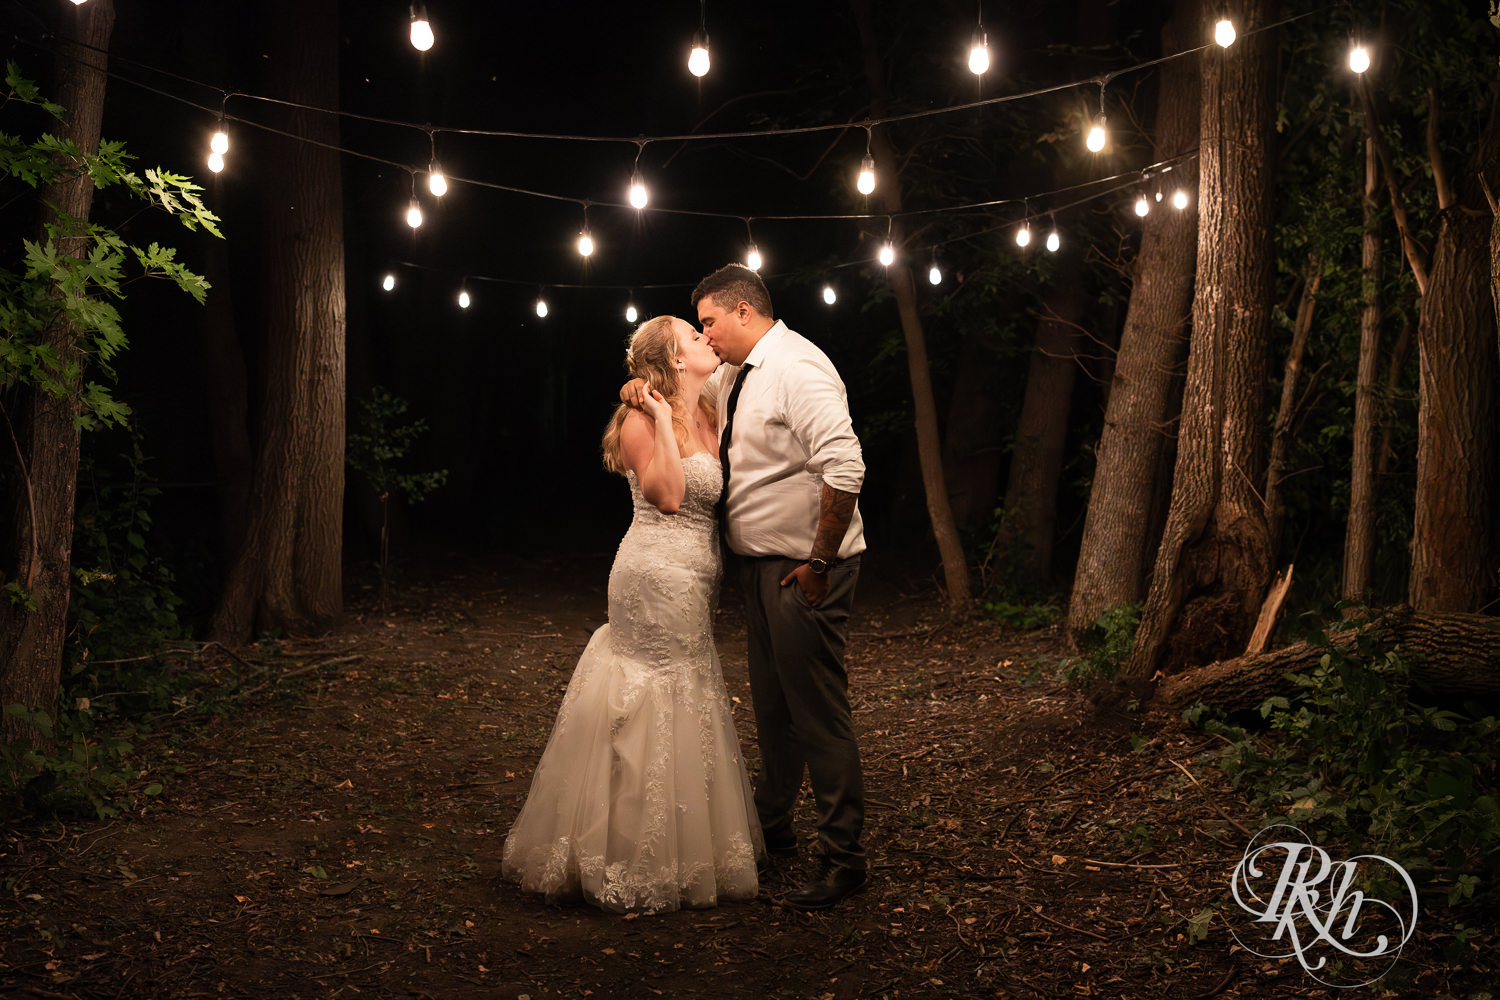 Bride and groom kiss under lights at night at Cottage Farmhouse in Glencoe, Minnesota.